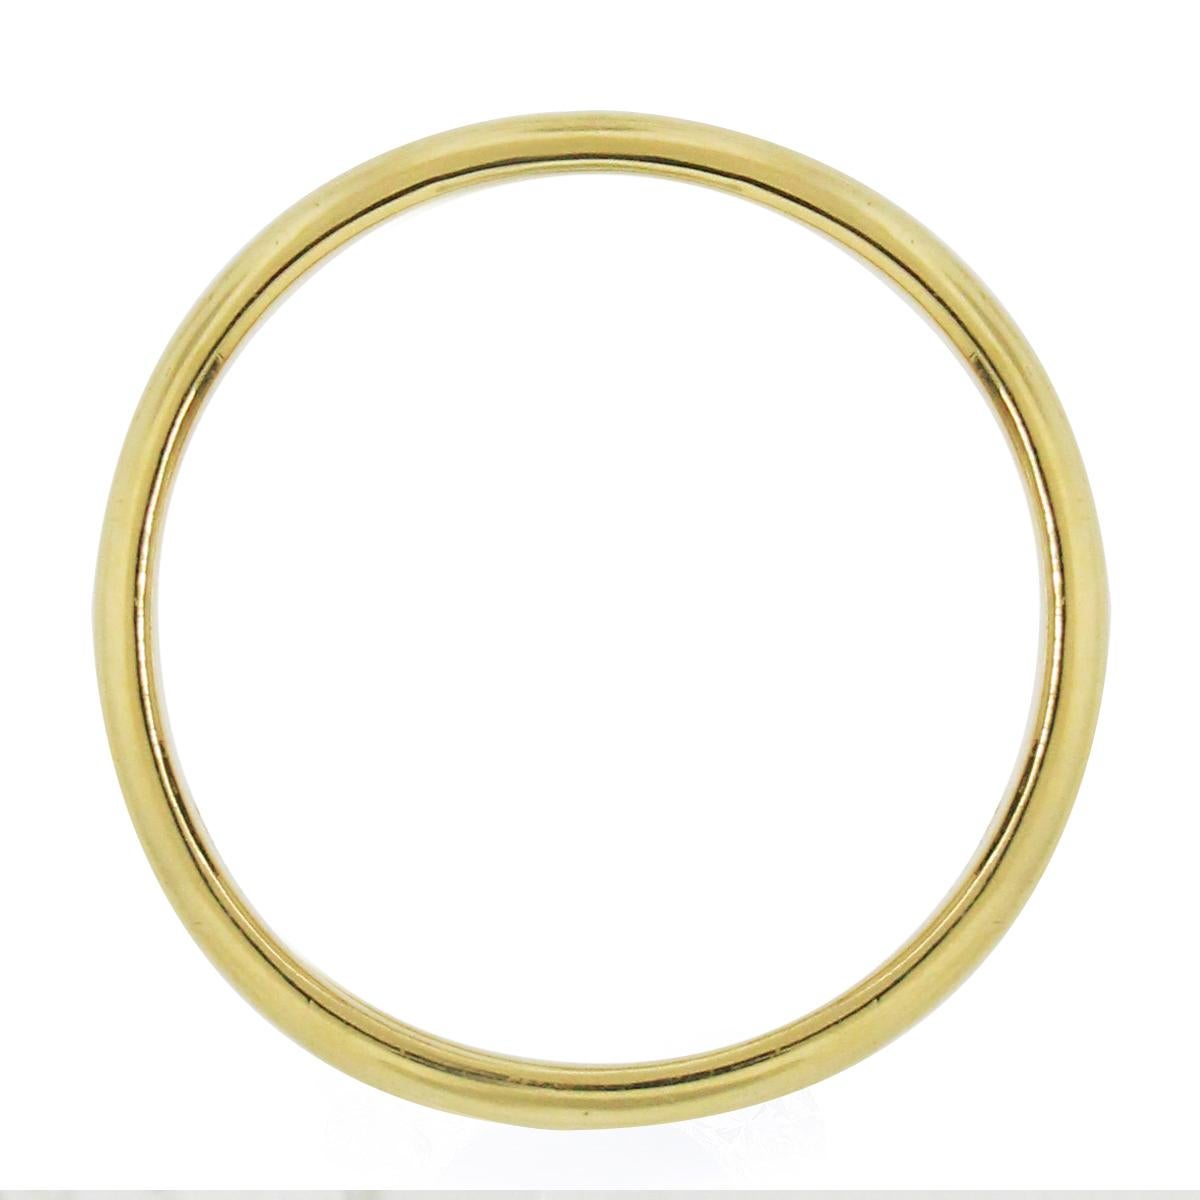 Brand: Tiffany & Co.
Material: 18k Yellow Gold
Ring Size: 8.5
Total Weight: 8.4g (5.5dwt)
Measurements: 0.92